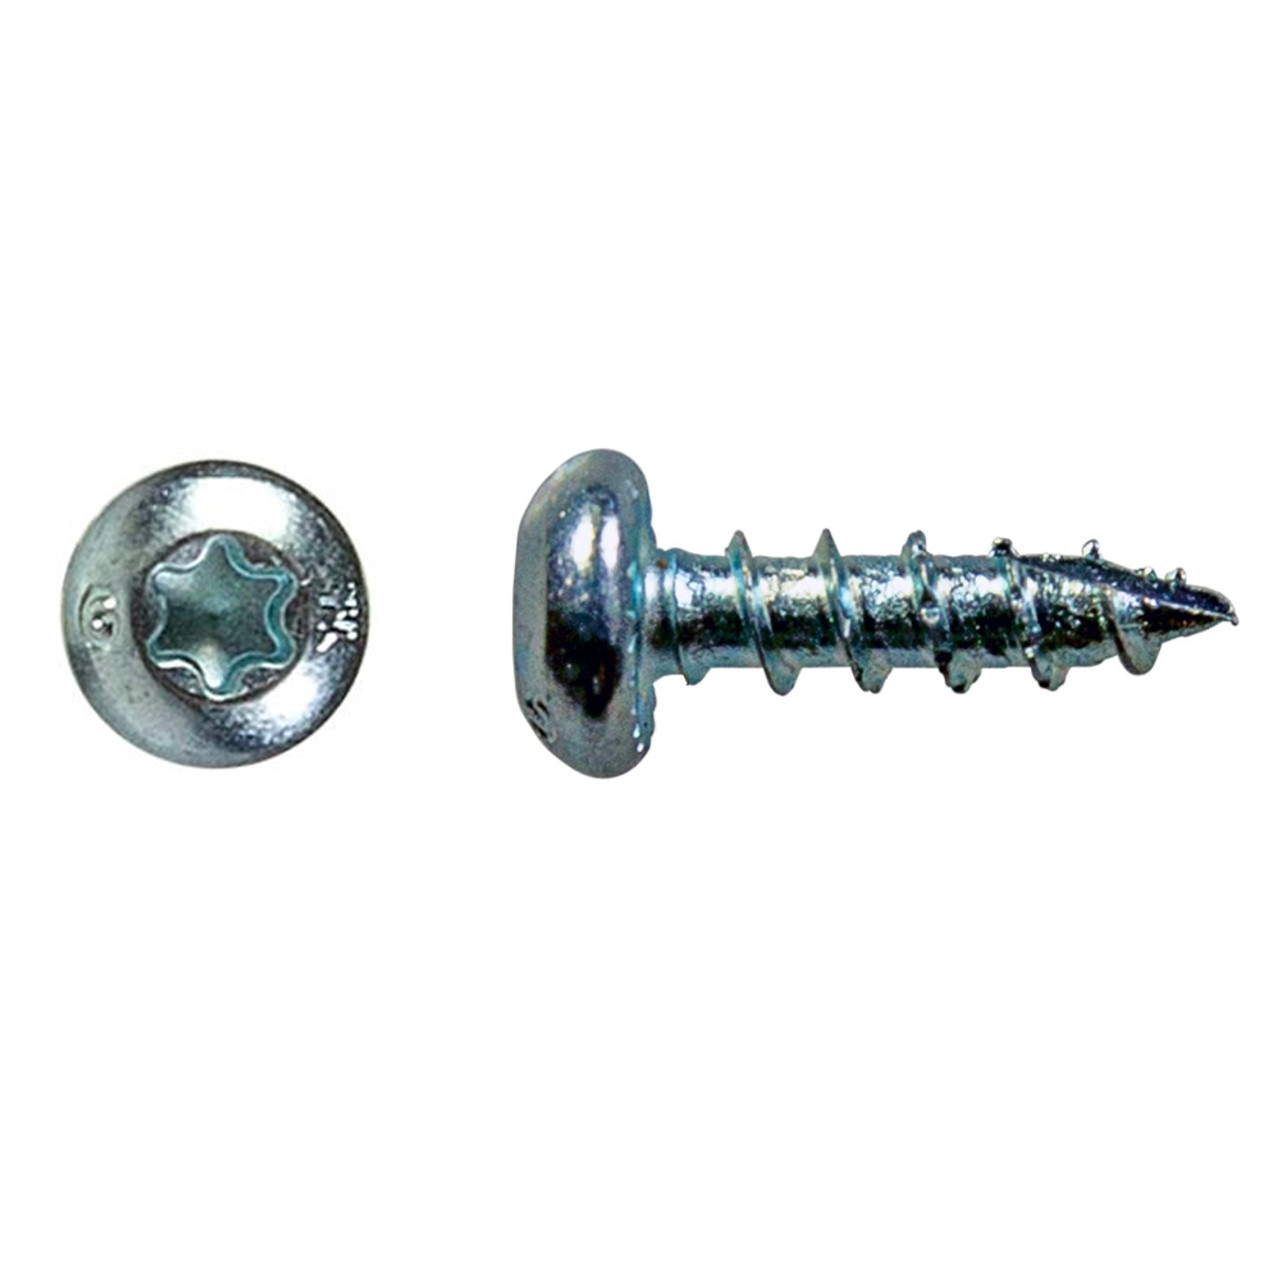 FASTENERS EAGLE 8MM 50 PARES